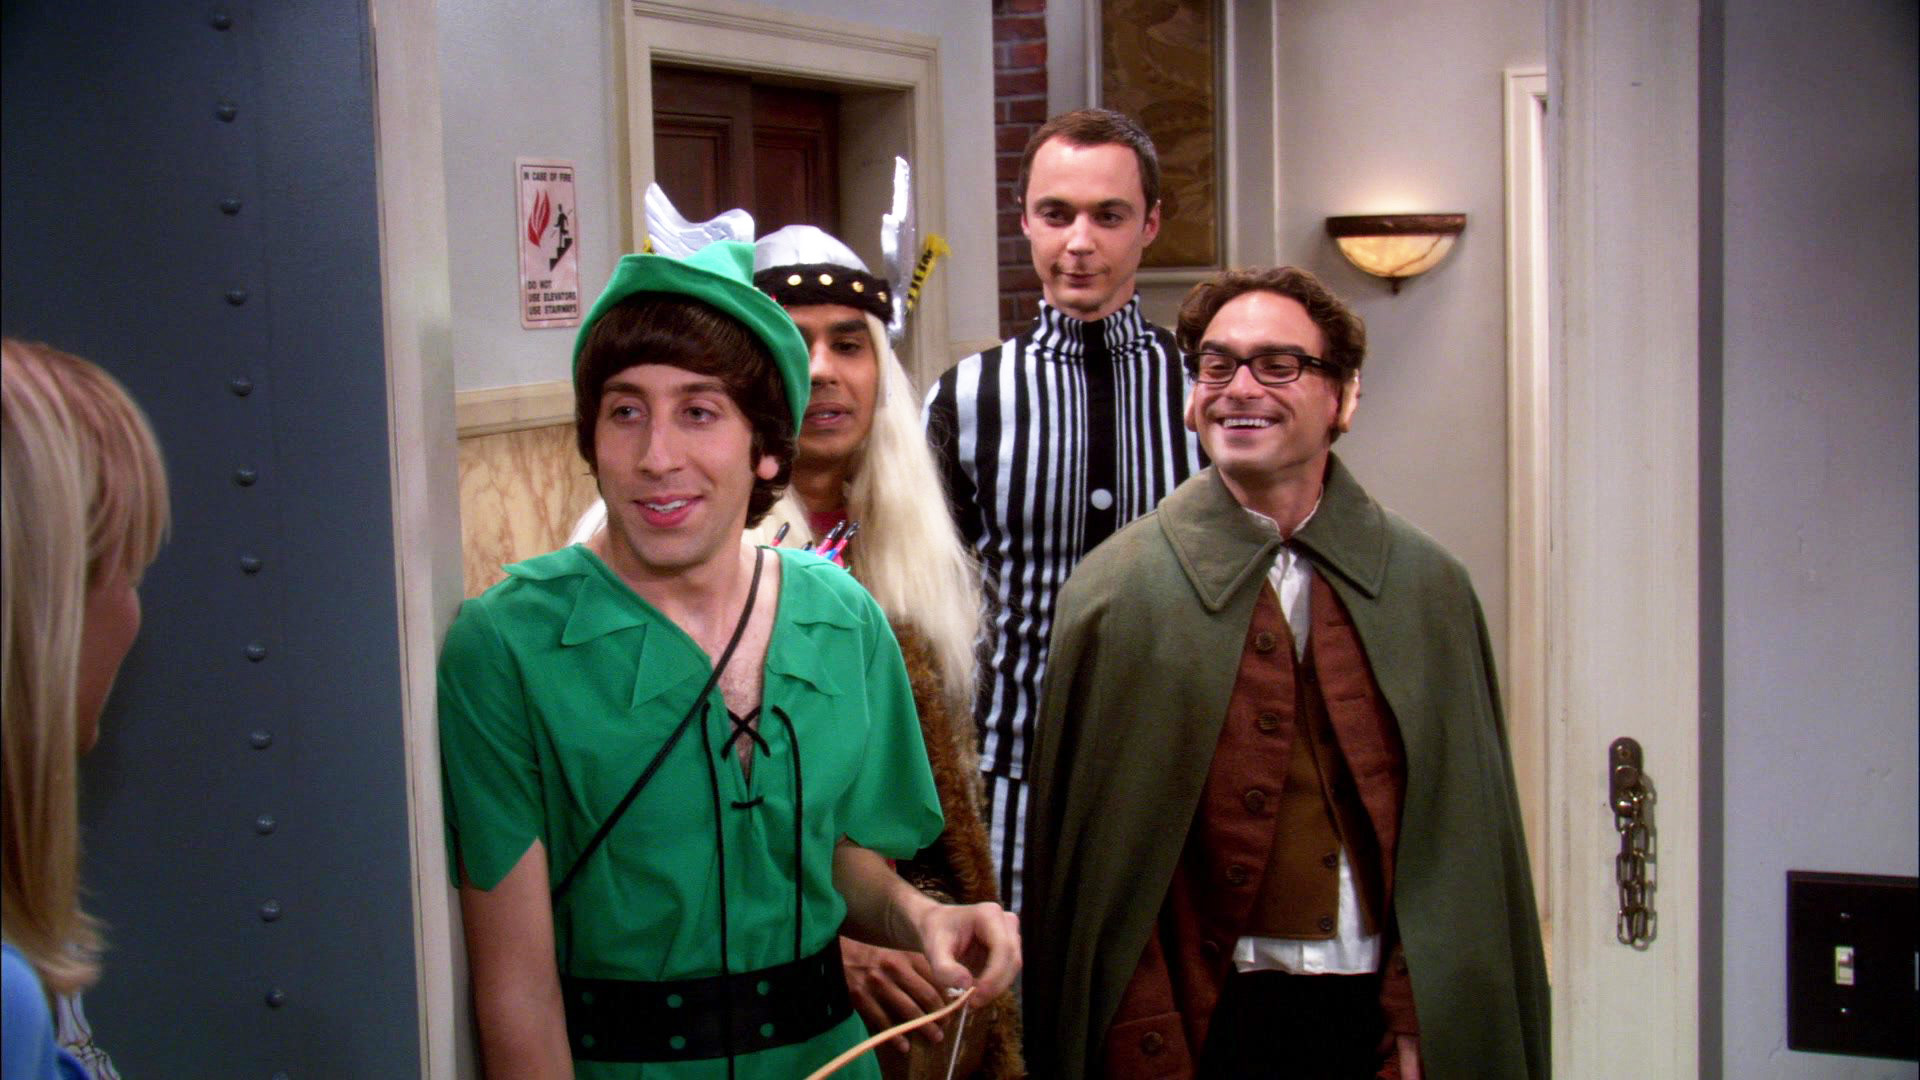 Just How Old Big Bang Theory Characters Were in Season 1?